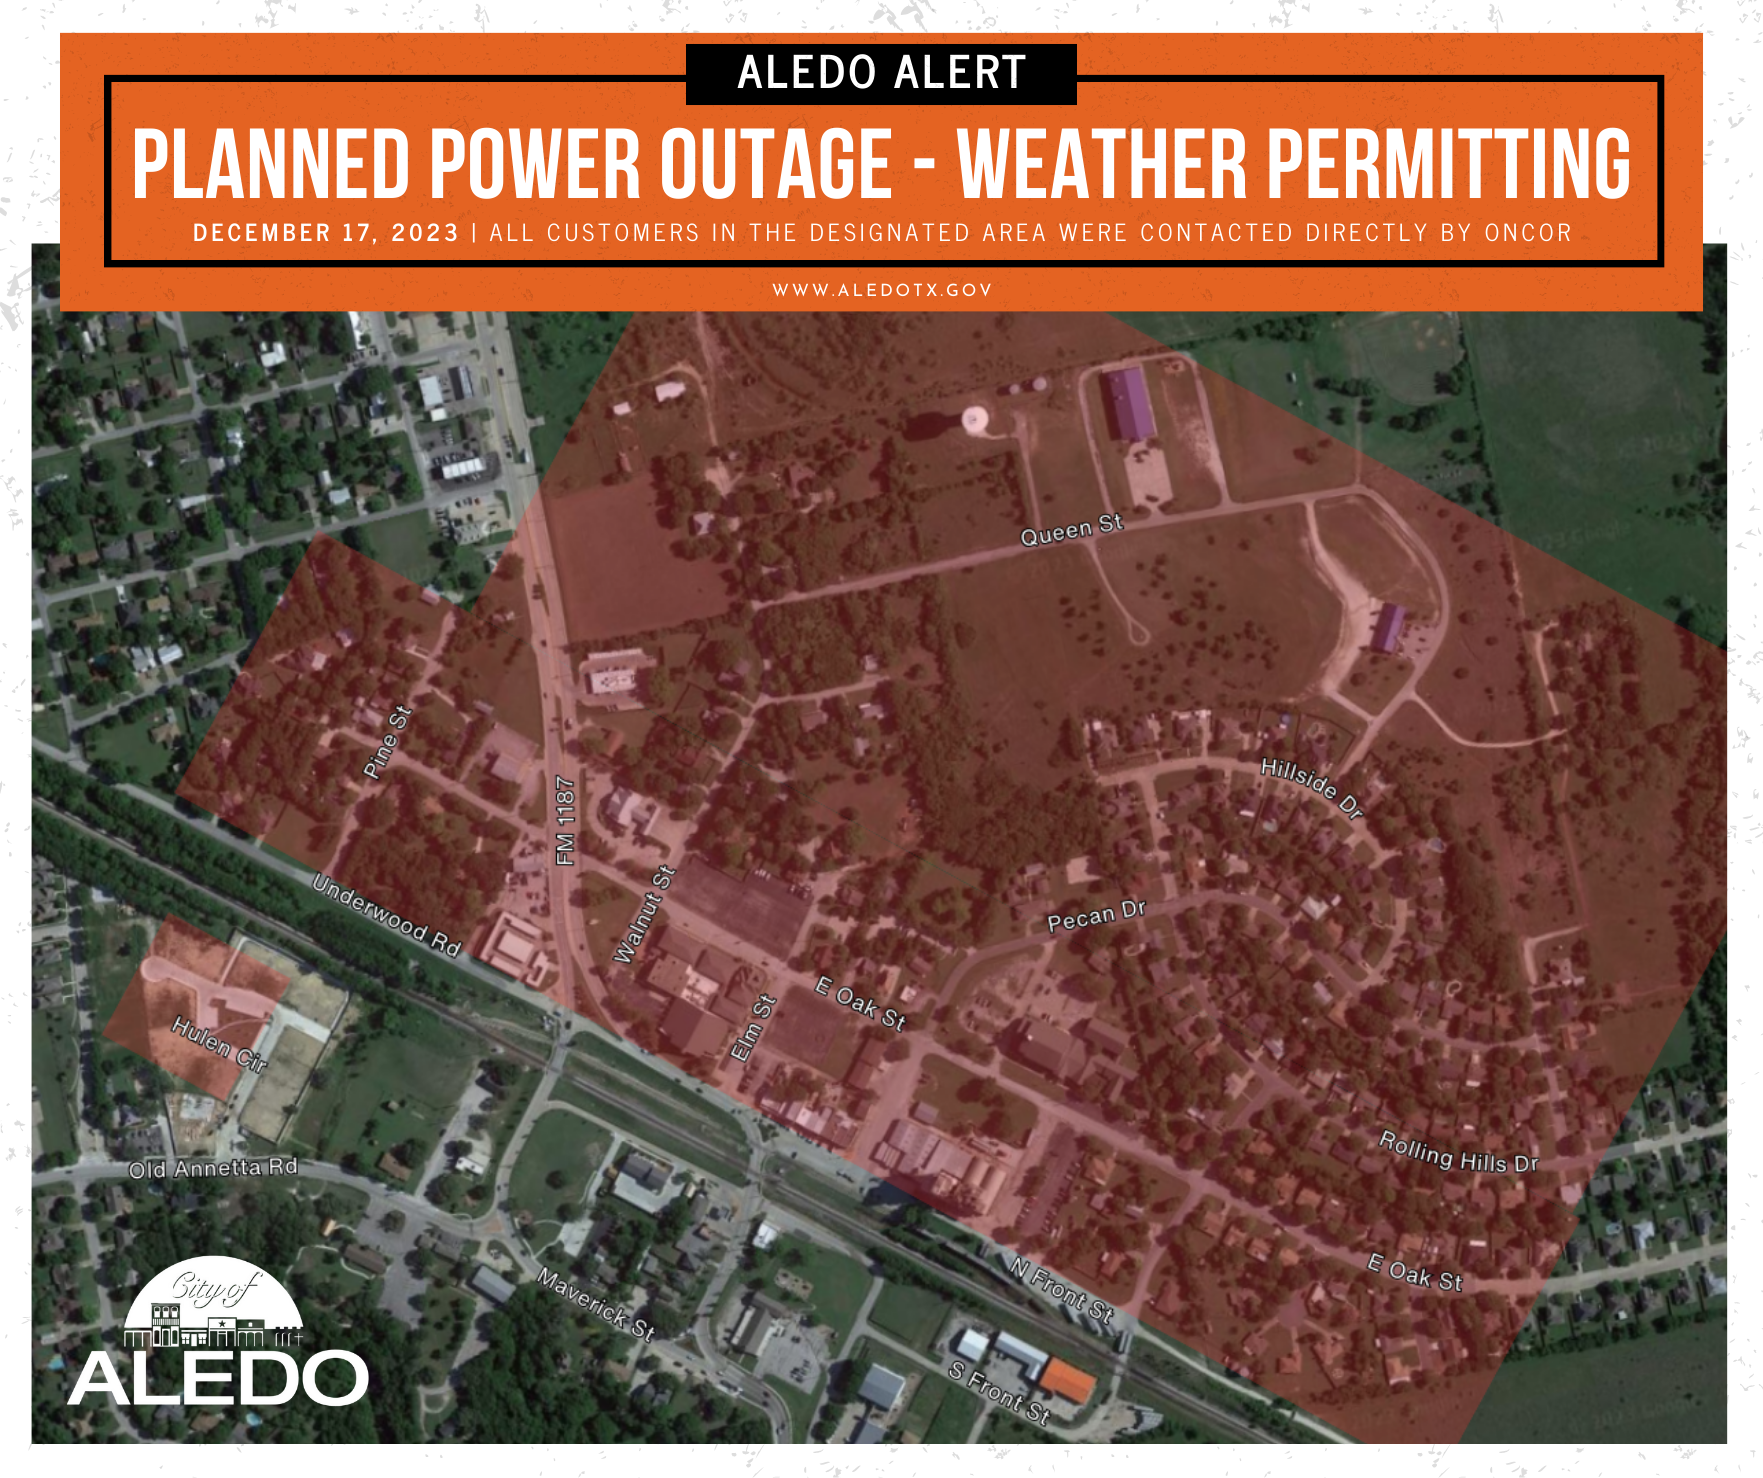 Aledo Alert Planned Power Outage